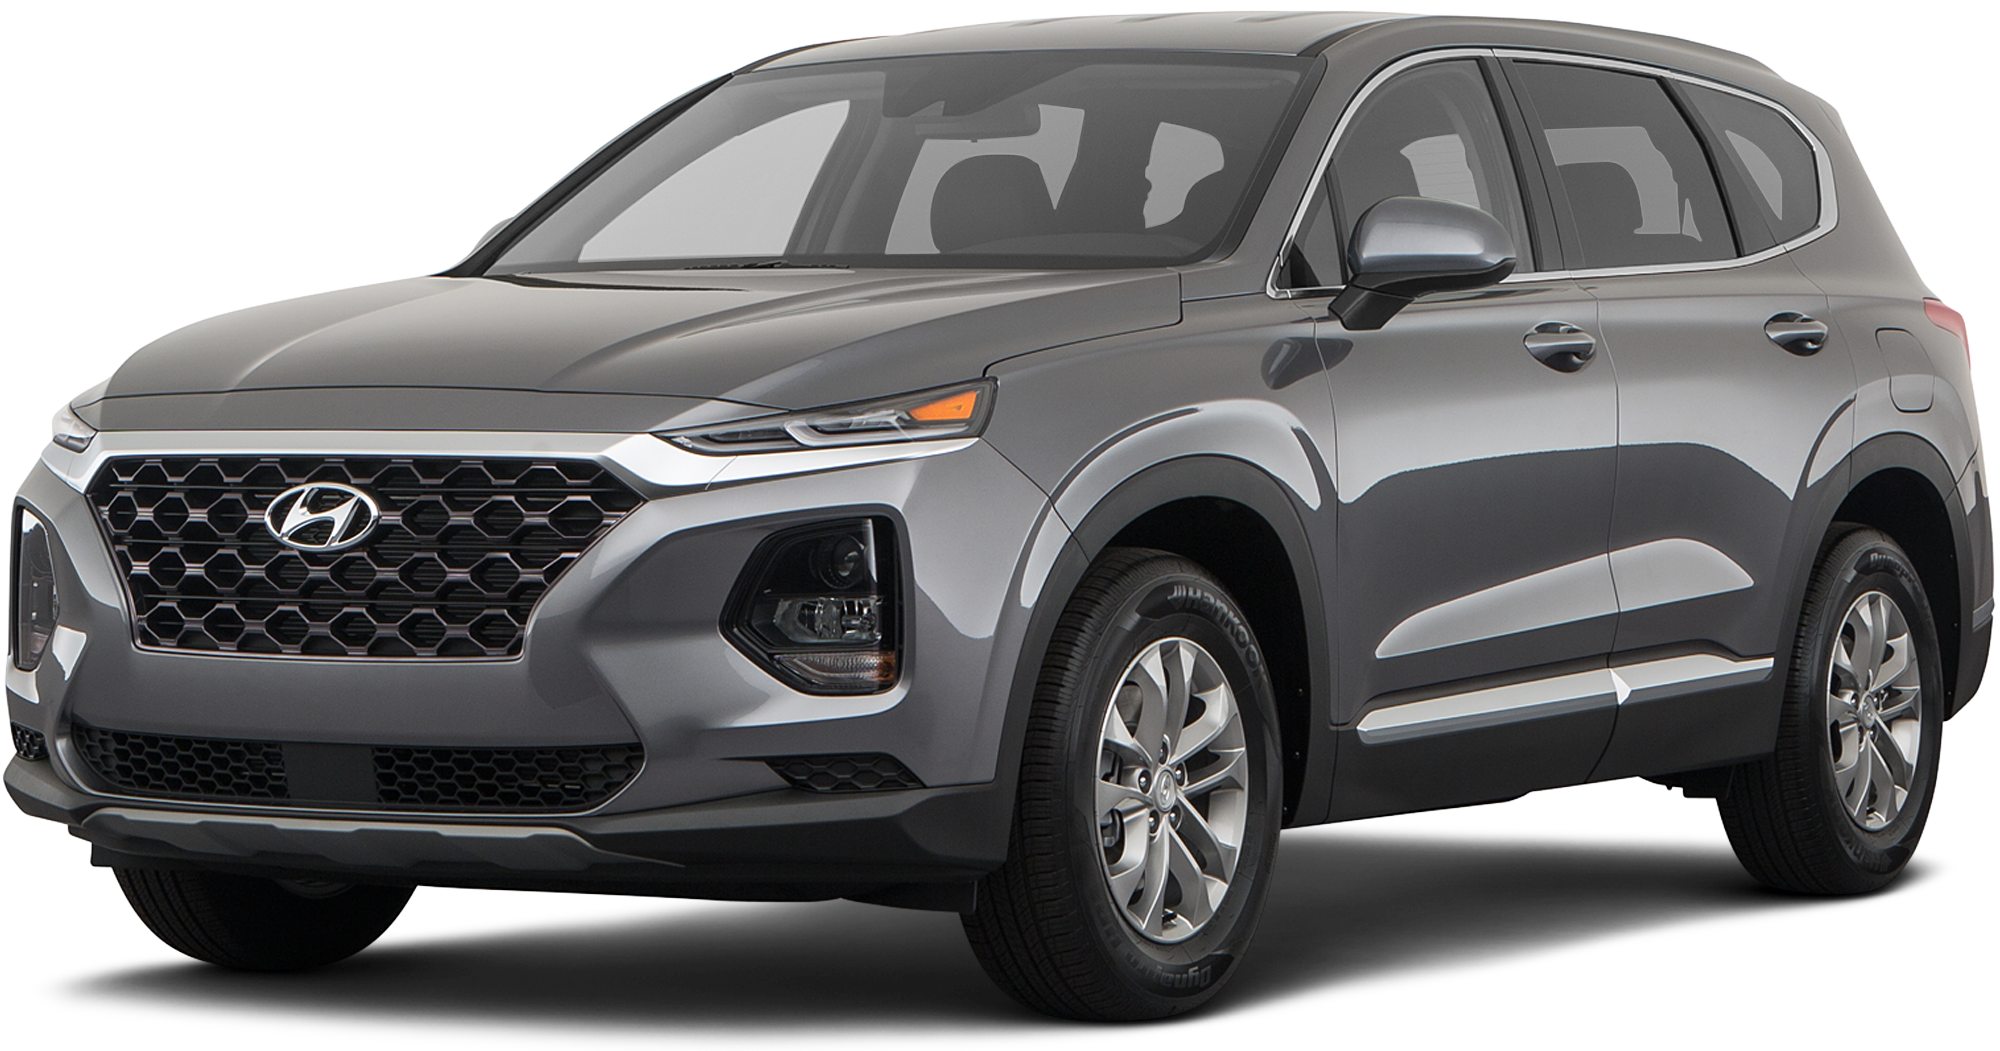 2020-hyundai-santa-fe-incentives-specials-offers-in-columbus-in